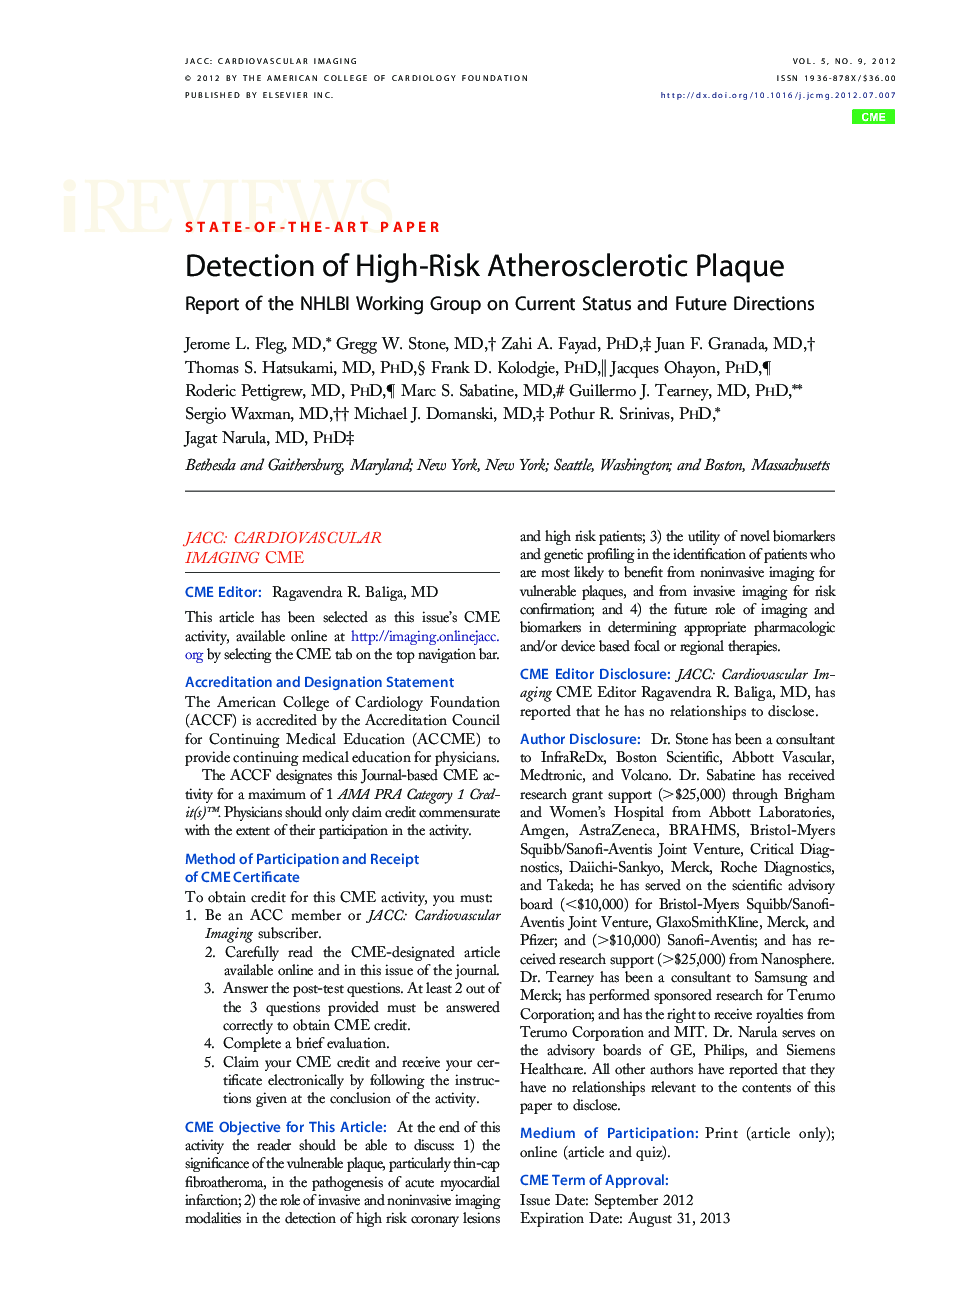 Detection of High-Risk Atherosclerotic Plaque : Report of the NHLBI Working Group on Current Status and Future Directions